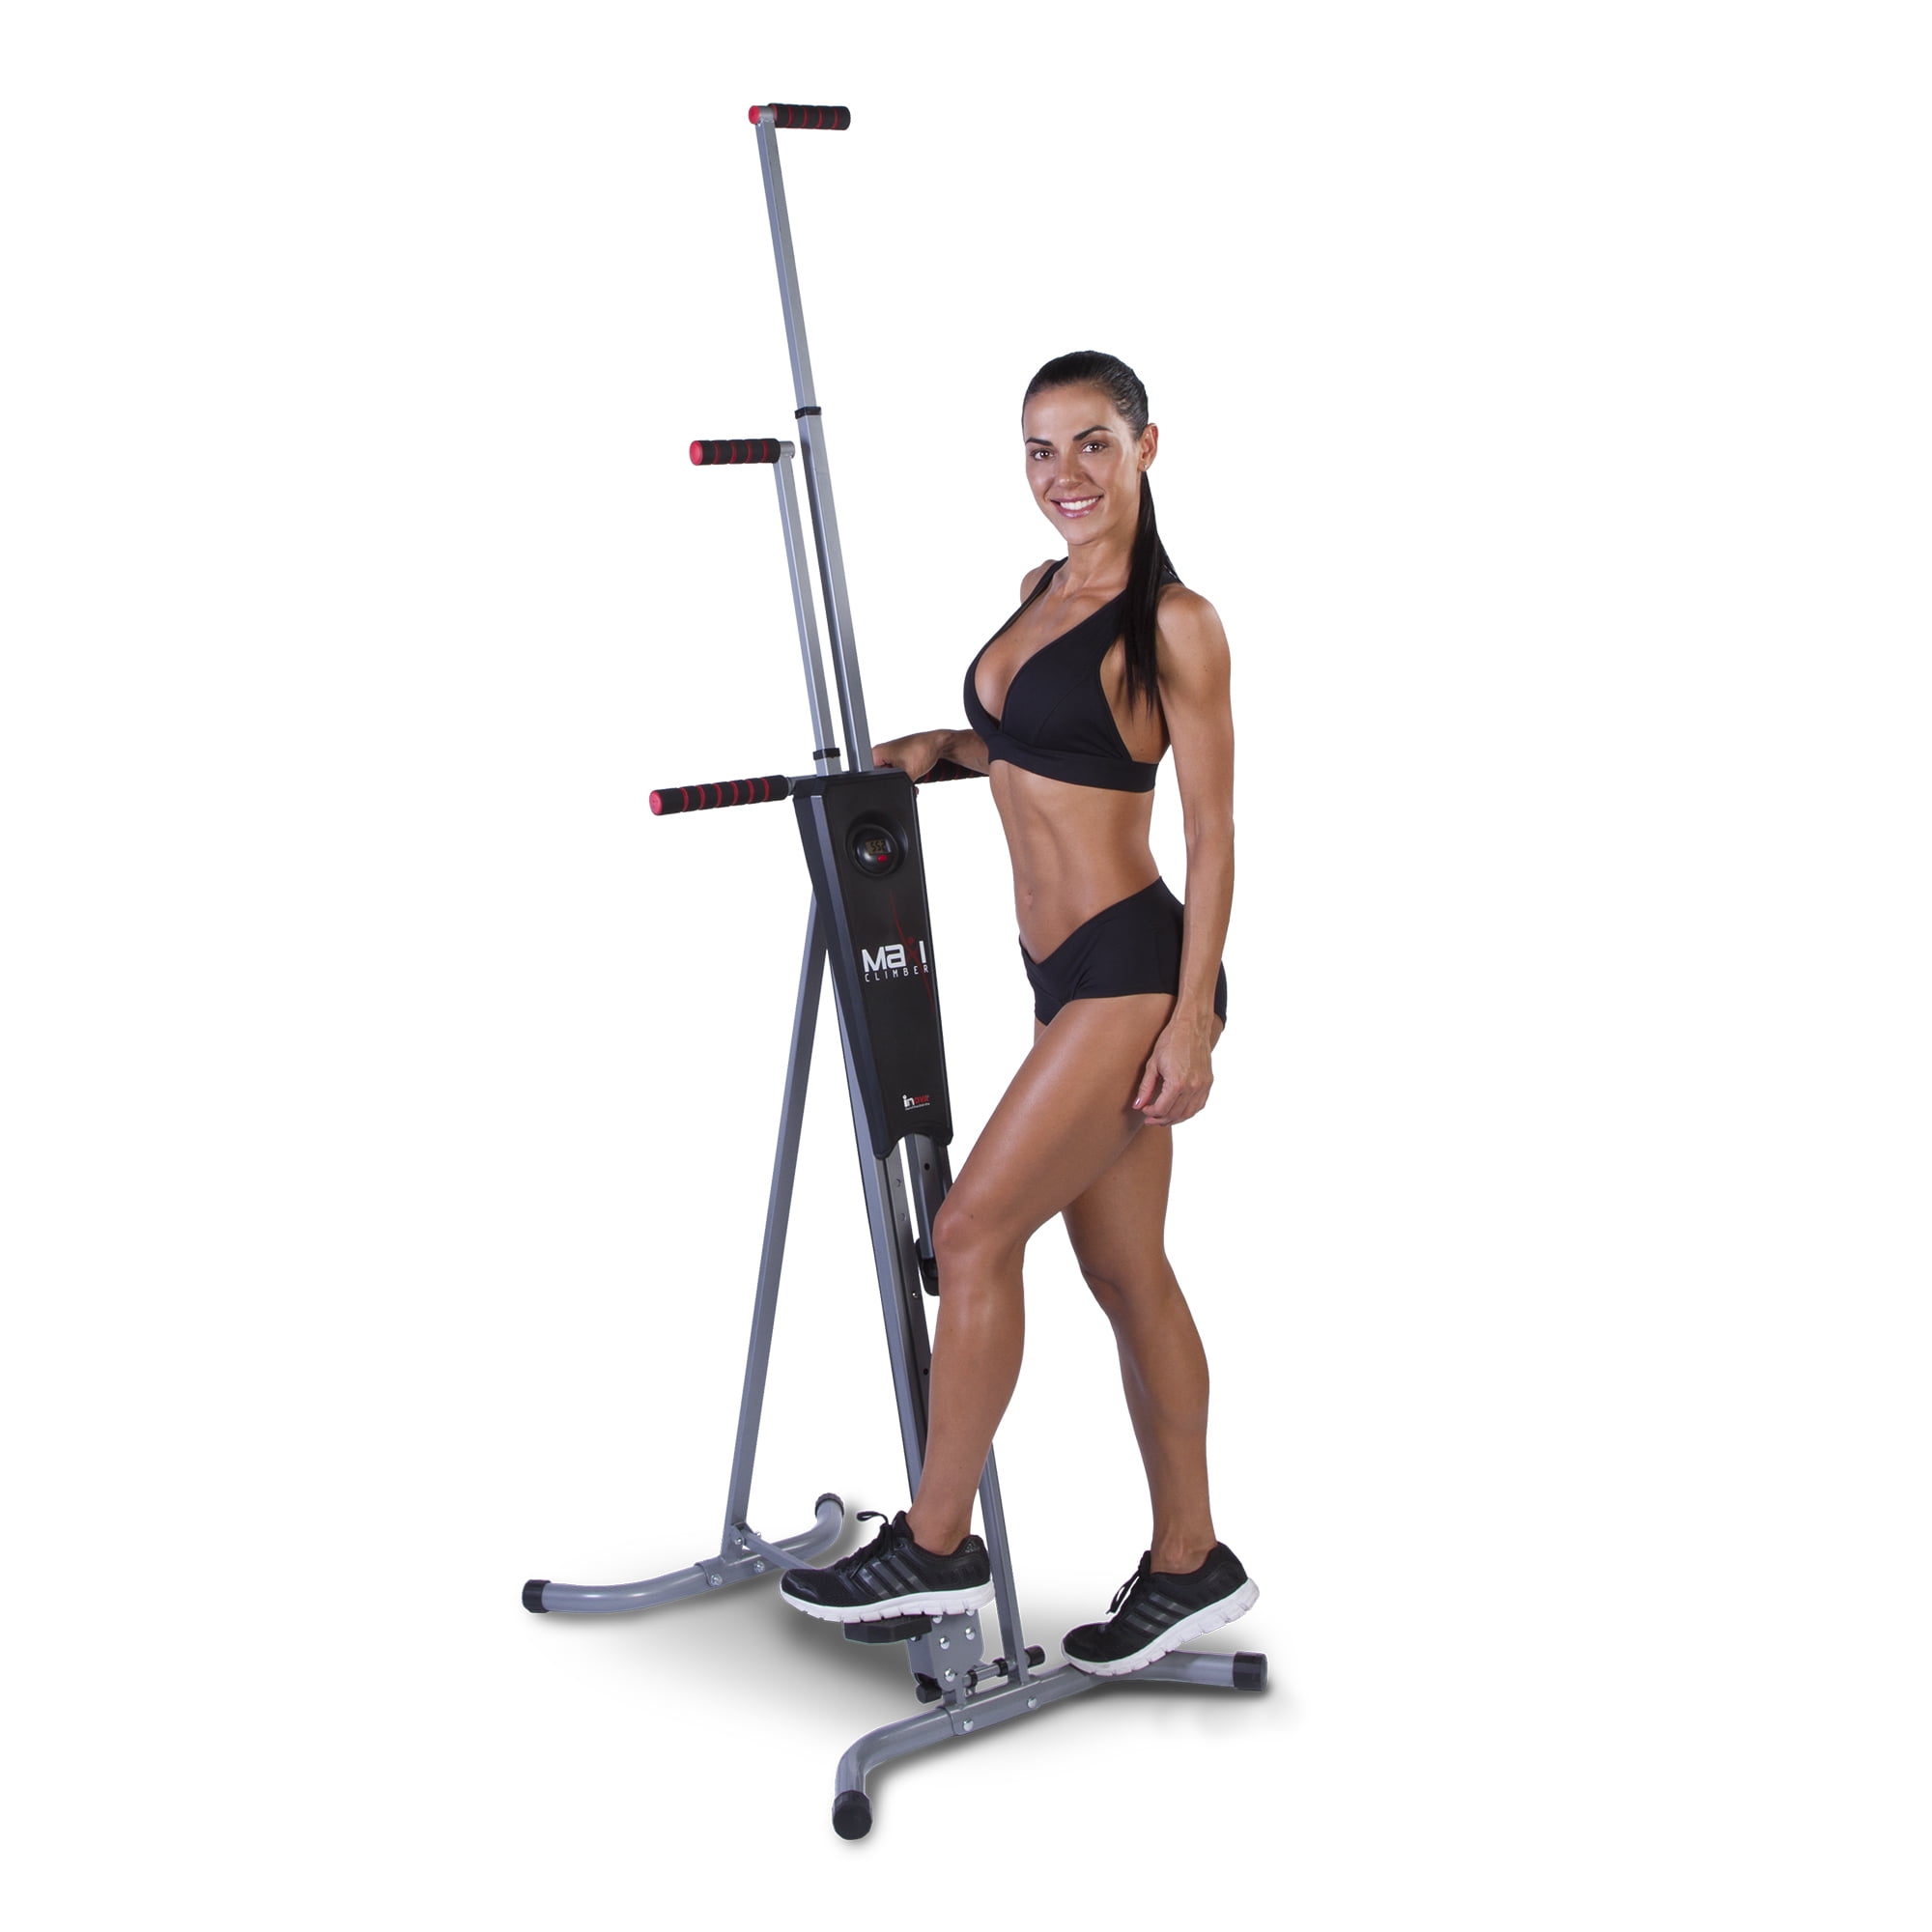 MaxiClimber Original Patented Full Body Workout Vertical Climber 400001986 for sale online 